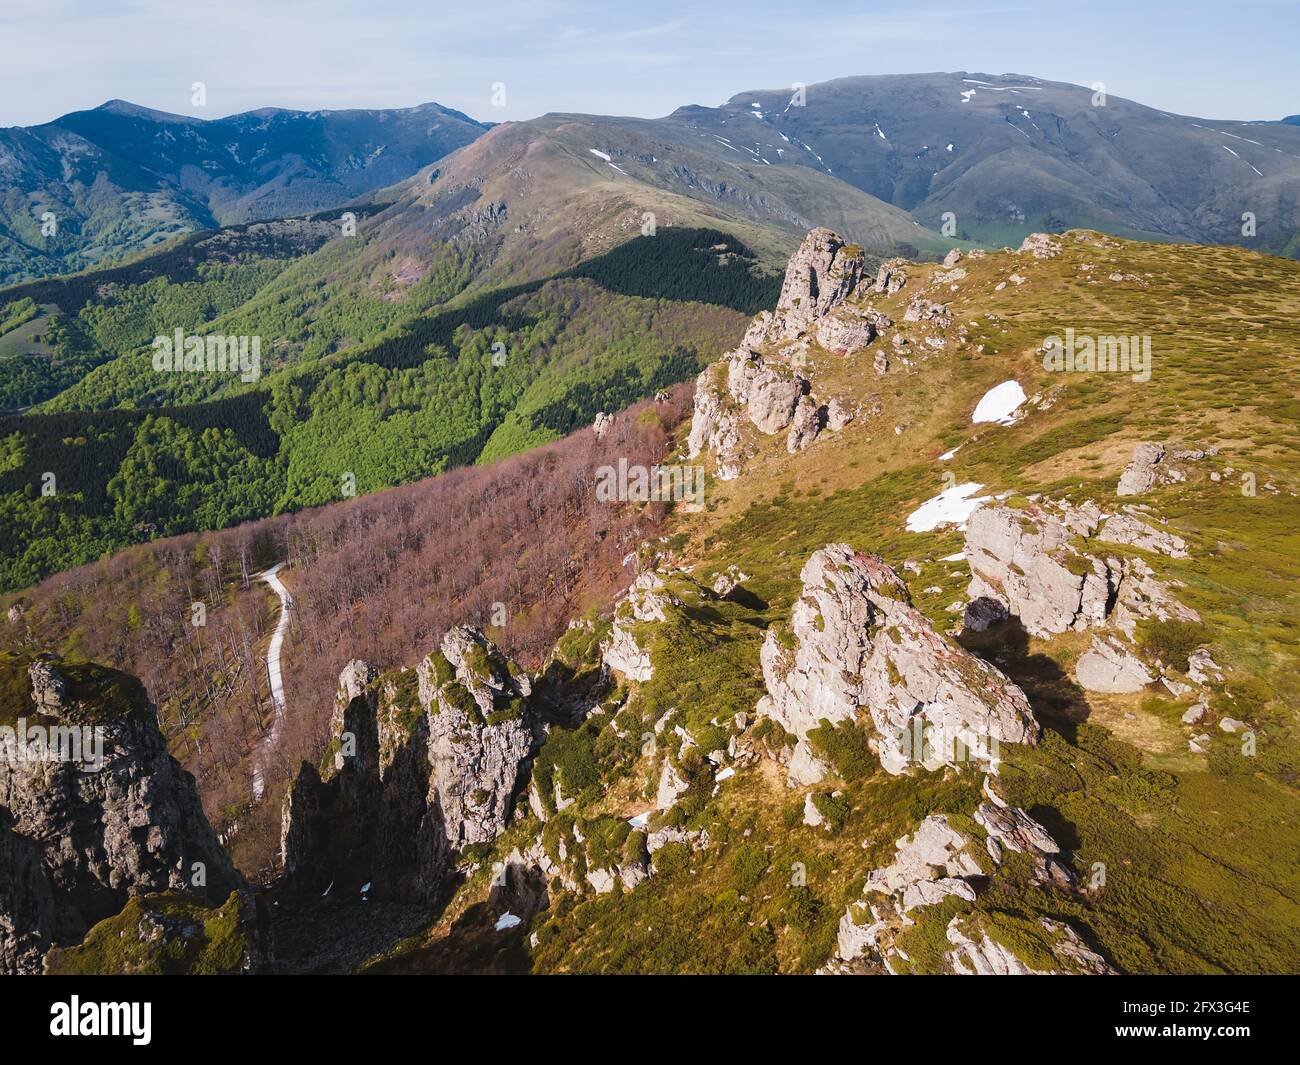 Landscape with mountains on a Sunny day. Babin Zub rock formation in Stara Planina, Balkan mountain, Nature outdoors travel destination, Serbia.Aerial Stock Photo